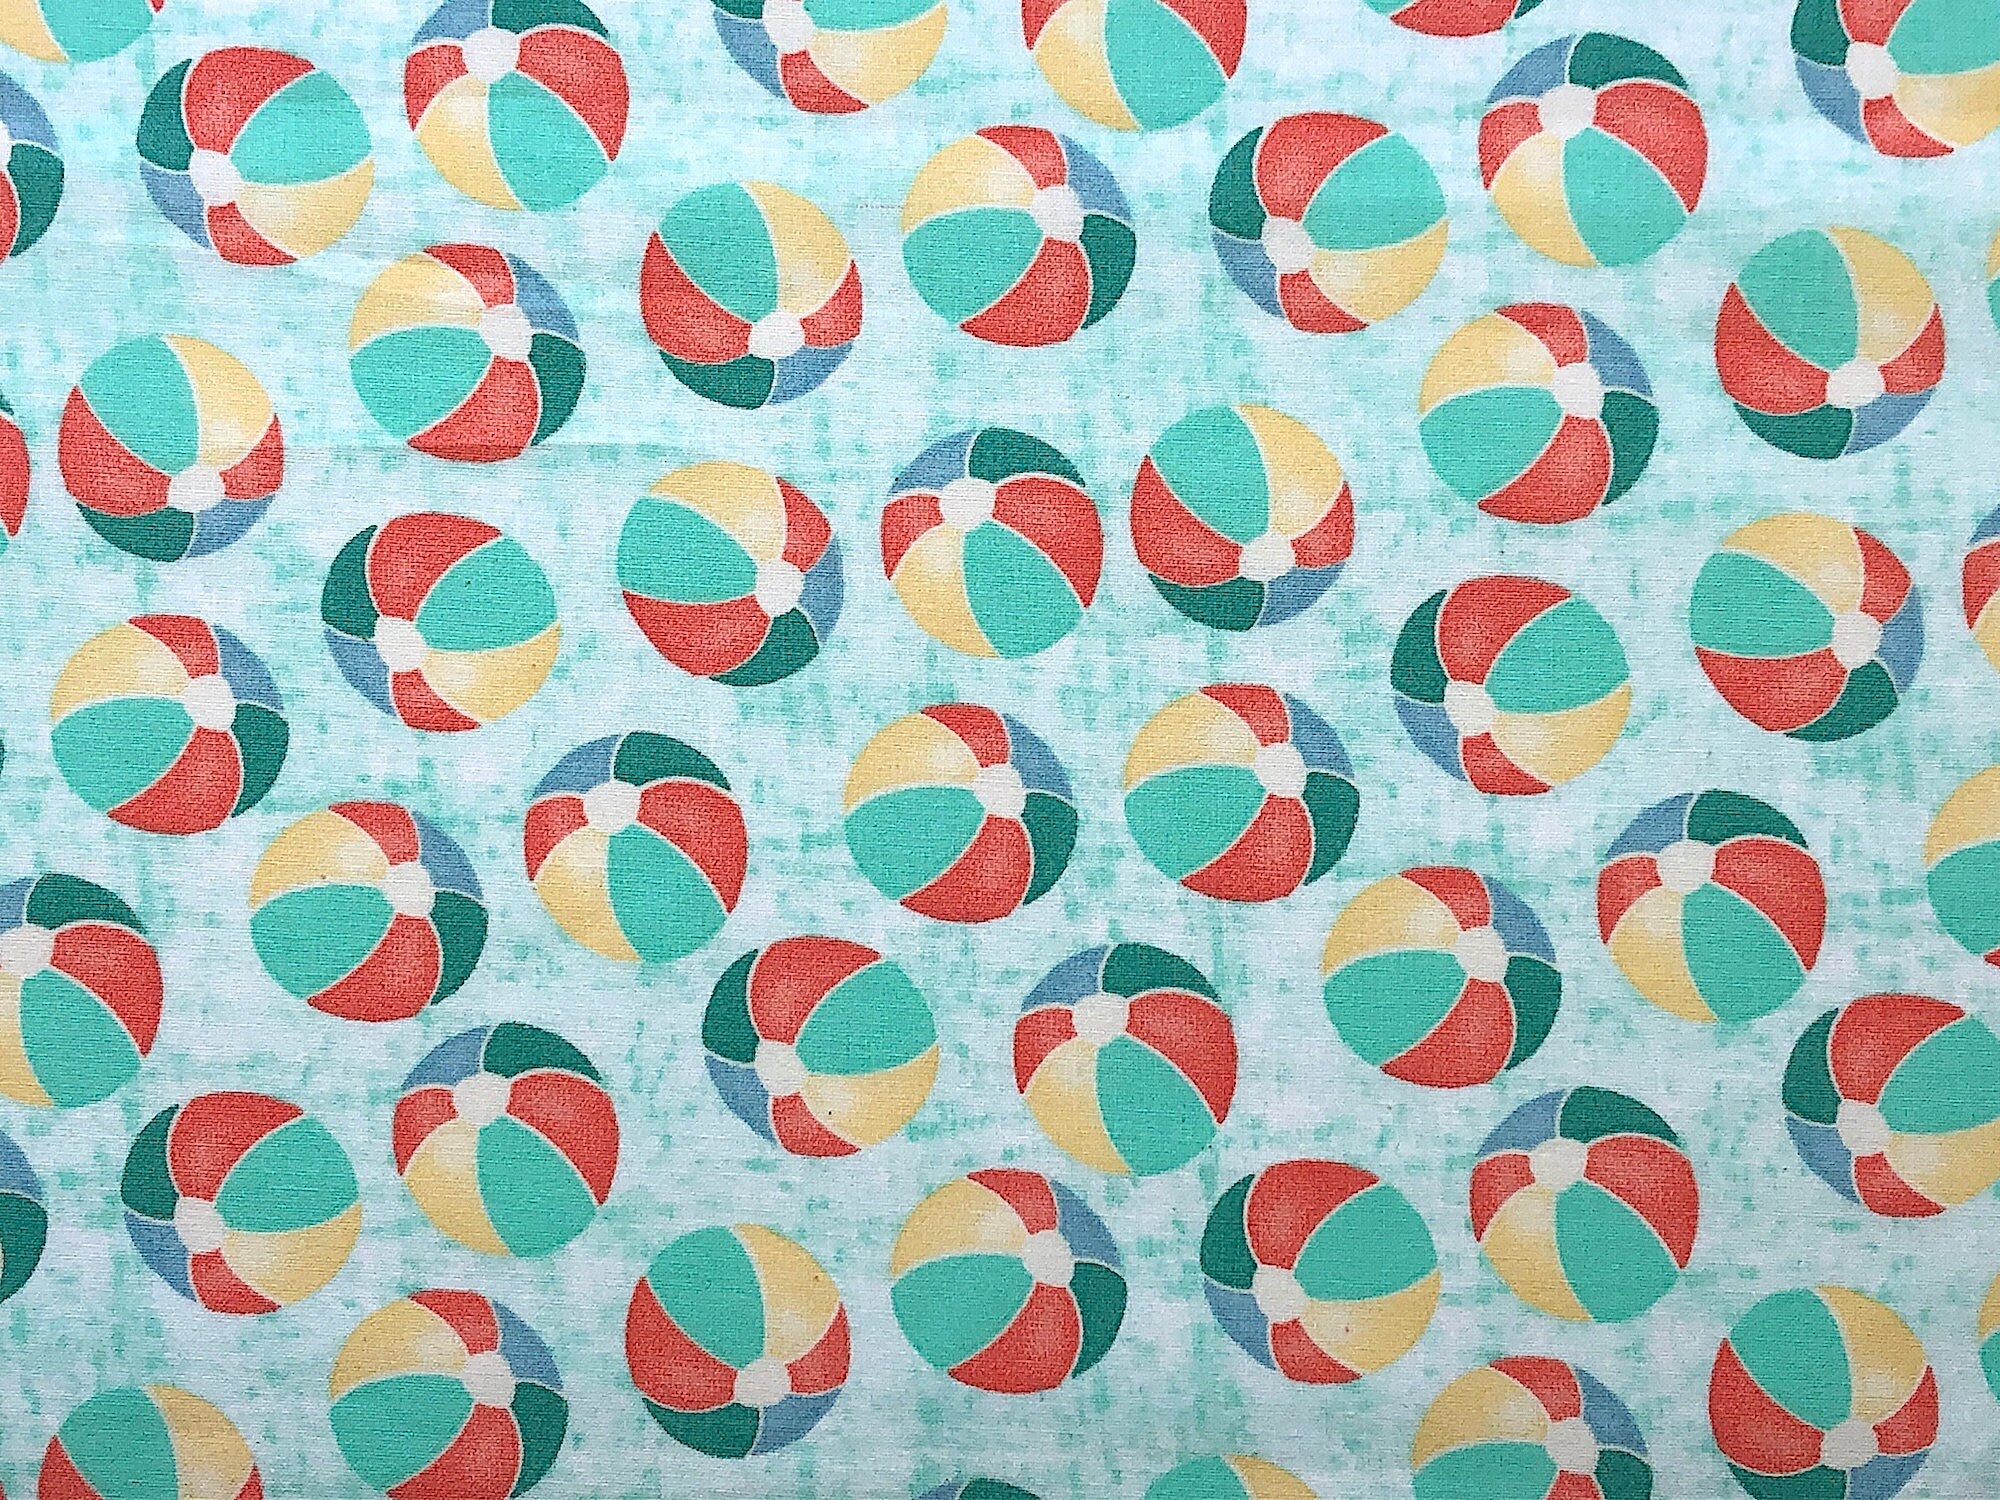 This nautical fabric is covered with beach balls. The beach balls are yellow, green and peach and white. This fabric is part of the Beach Travel Collection by Beth Albert.